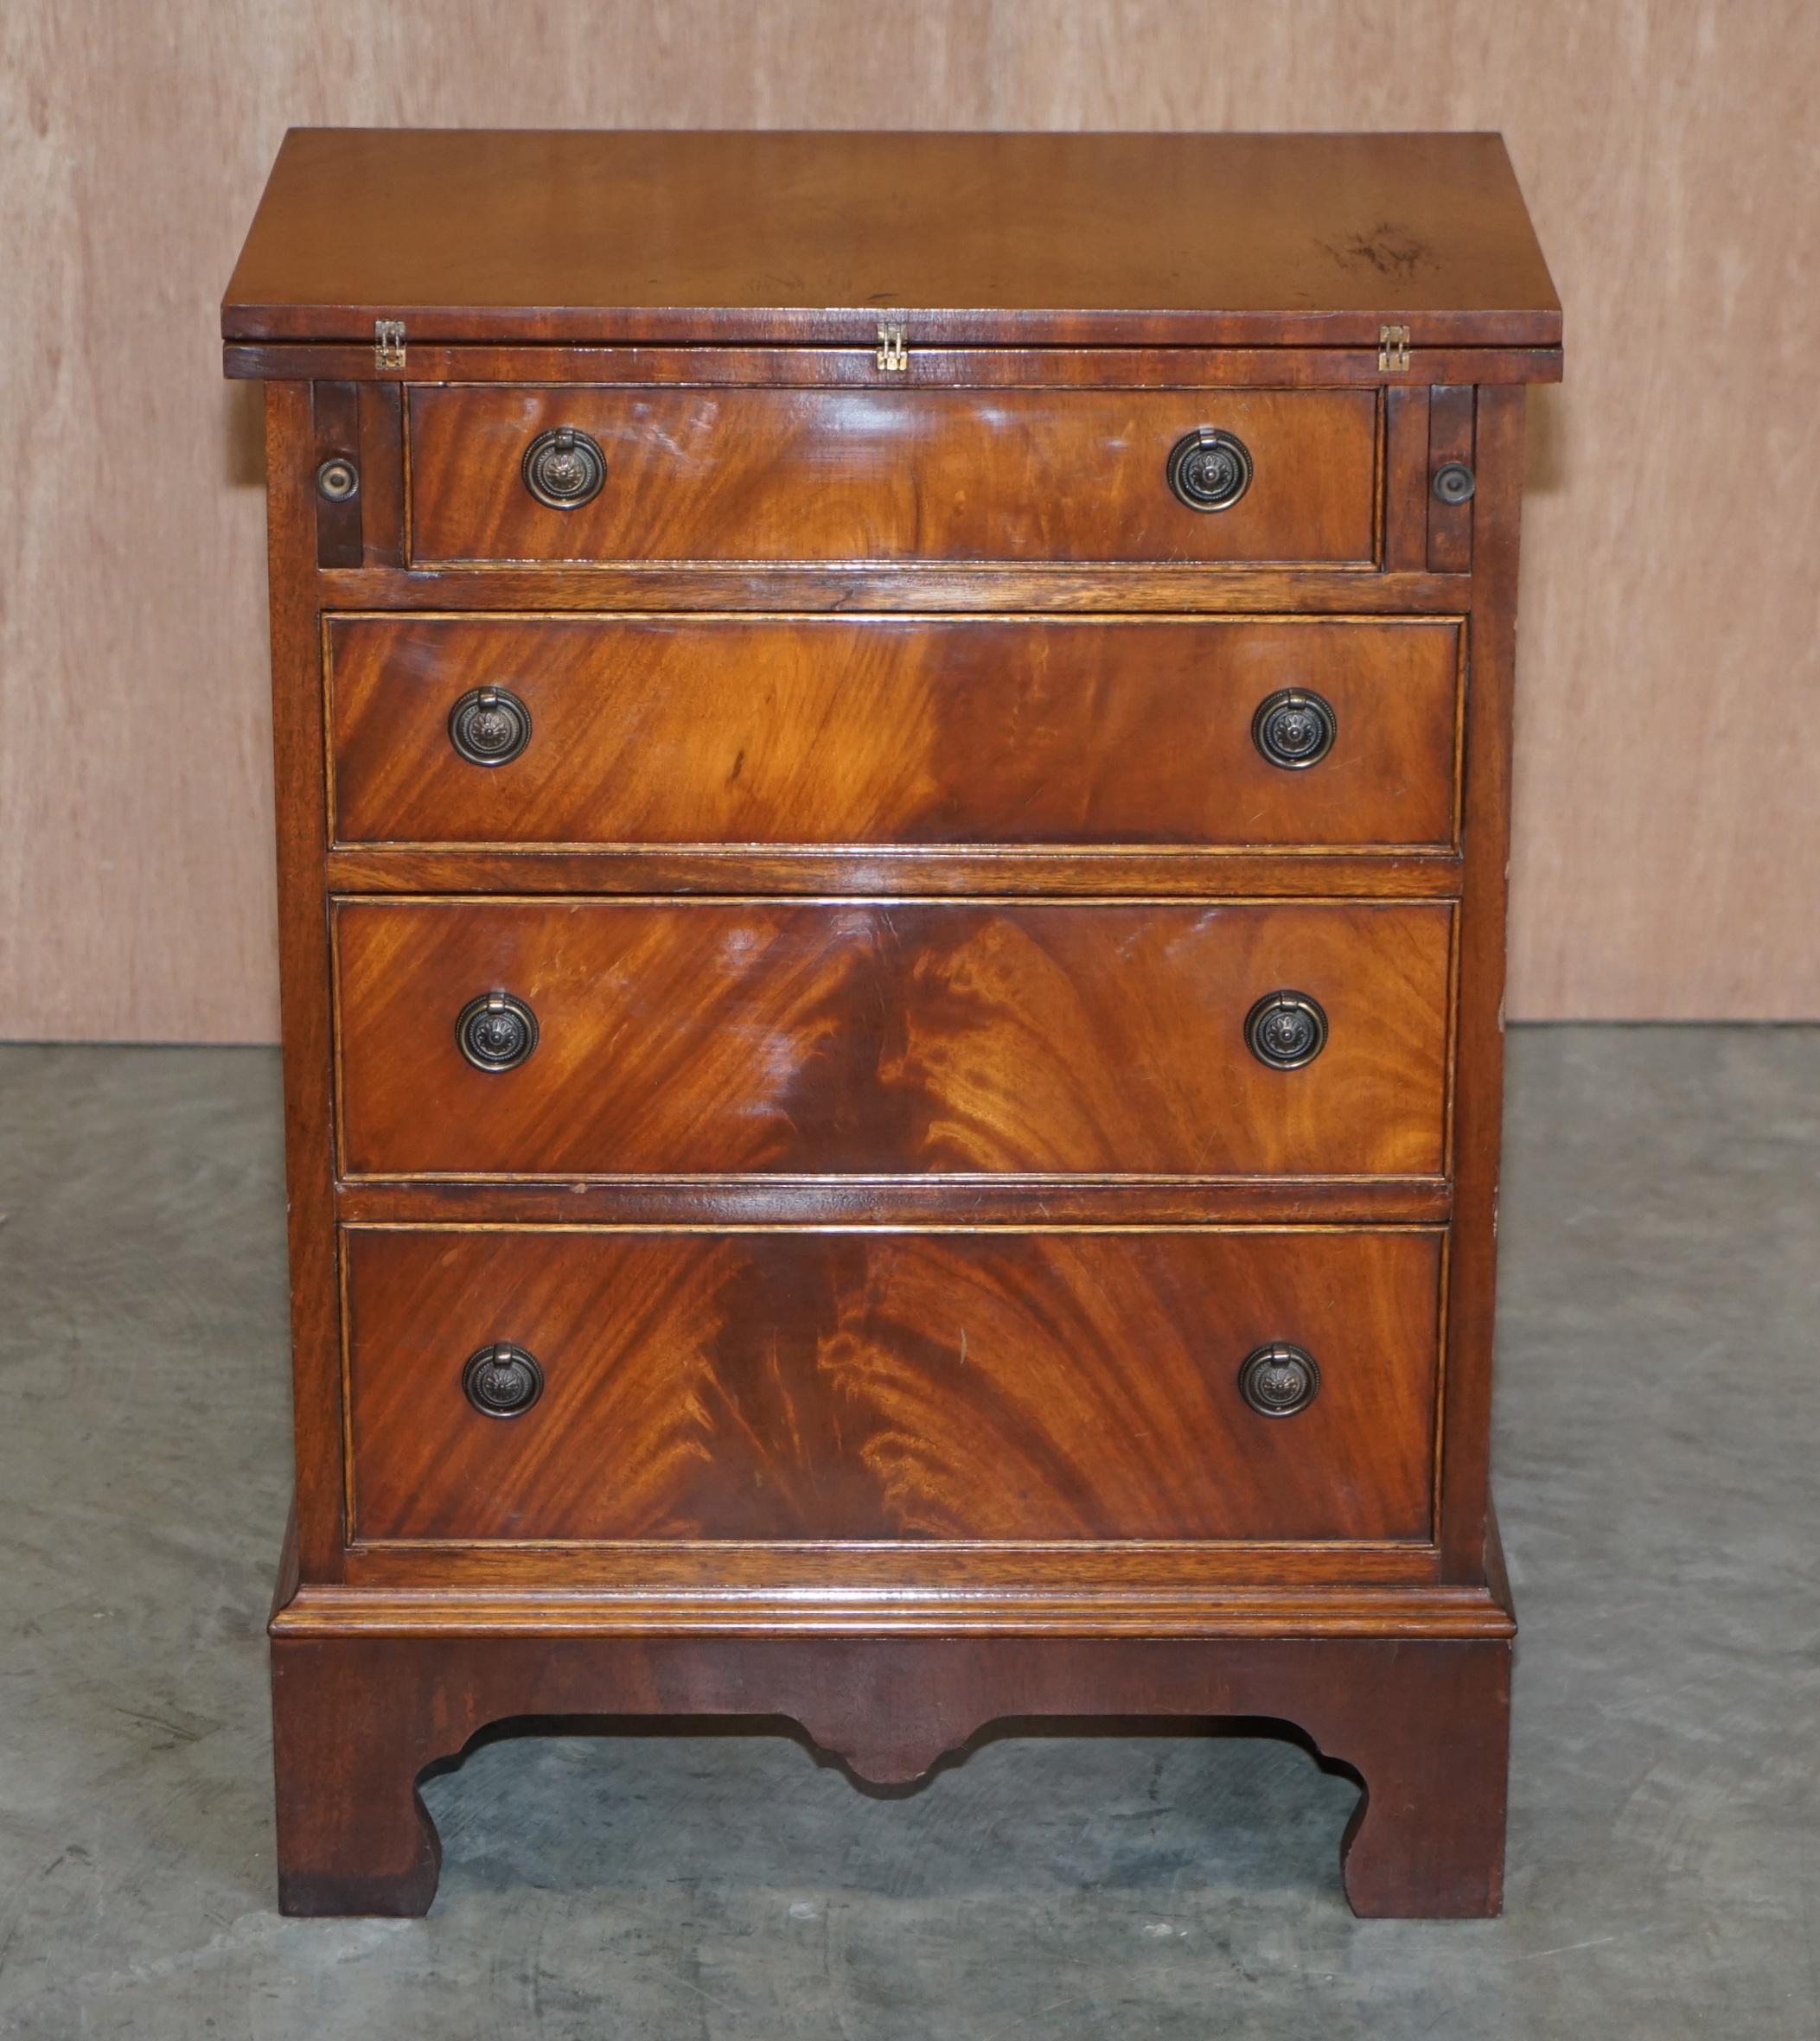 We are delighted to this stunning flamed mahogany bachelor’s chest of drawers with folding butlers shelf

A very good looking well-made and functional piece of furniture. It as for all intents and purposes a Georgian style chest of drawers however